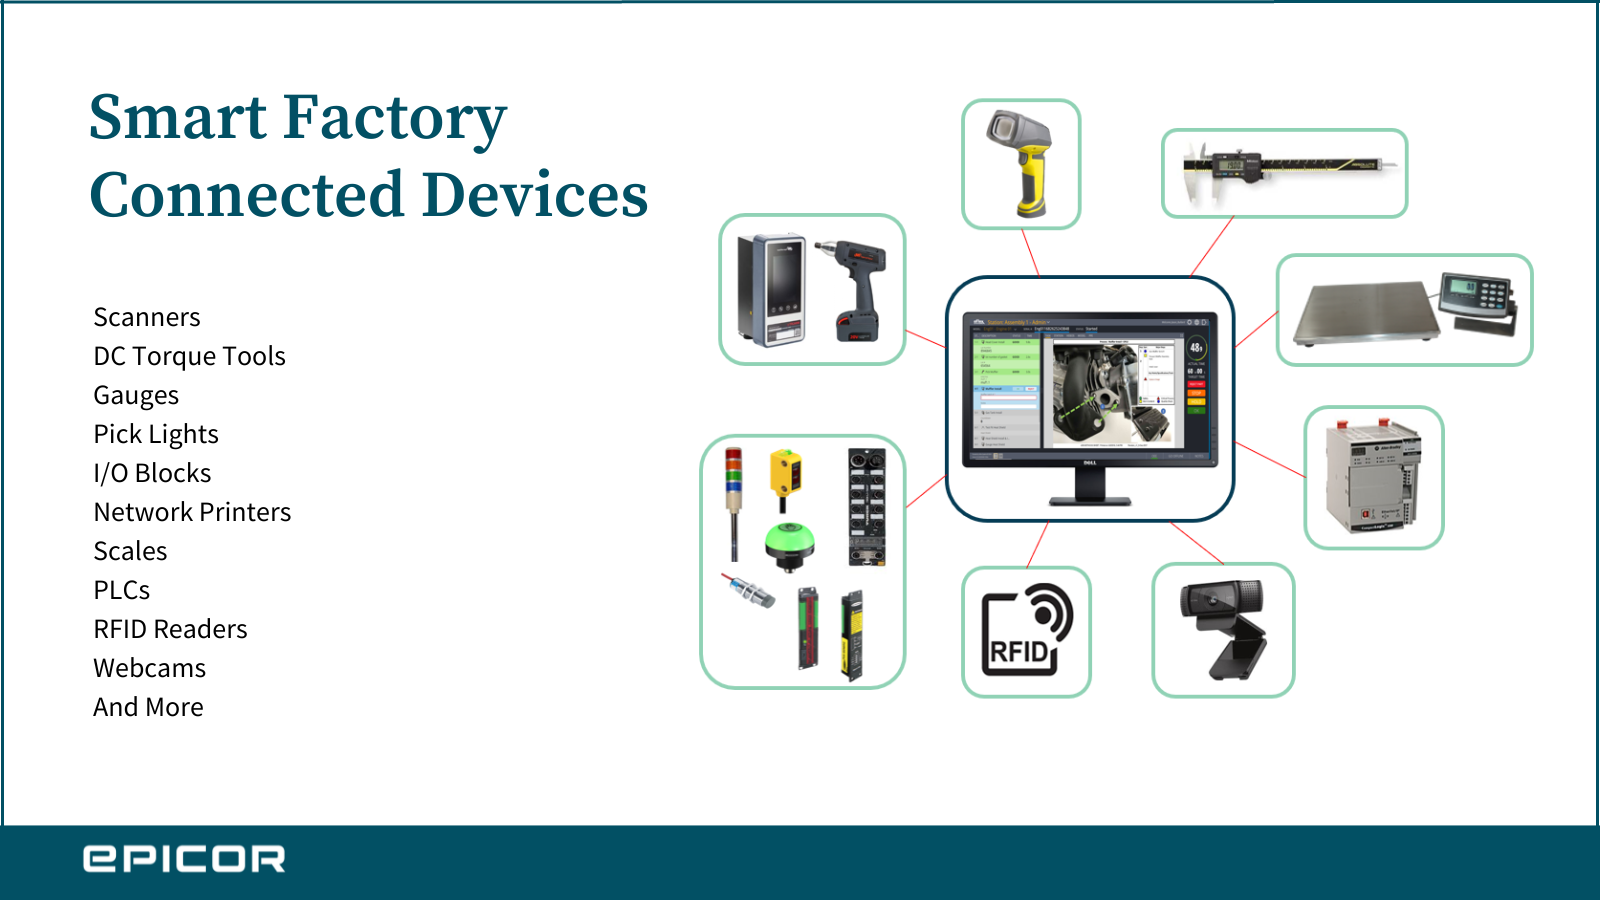 Epicor Smart Factory Connected Devices